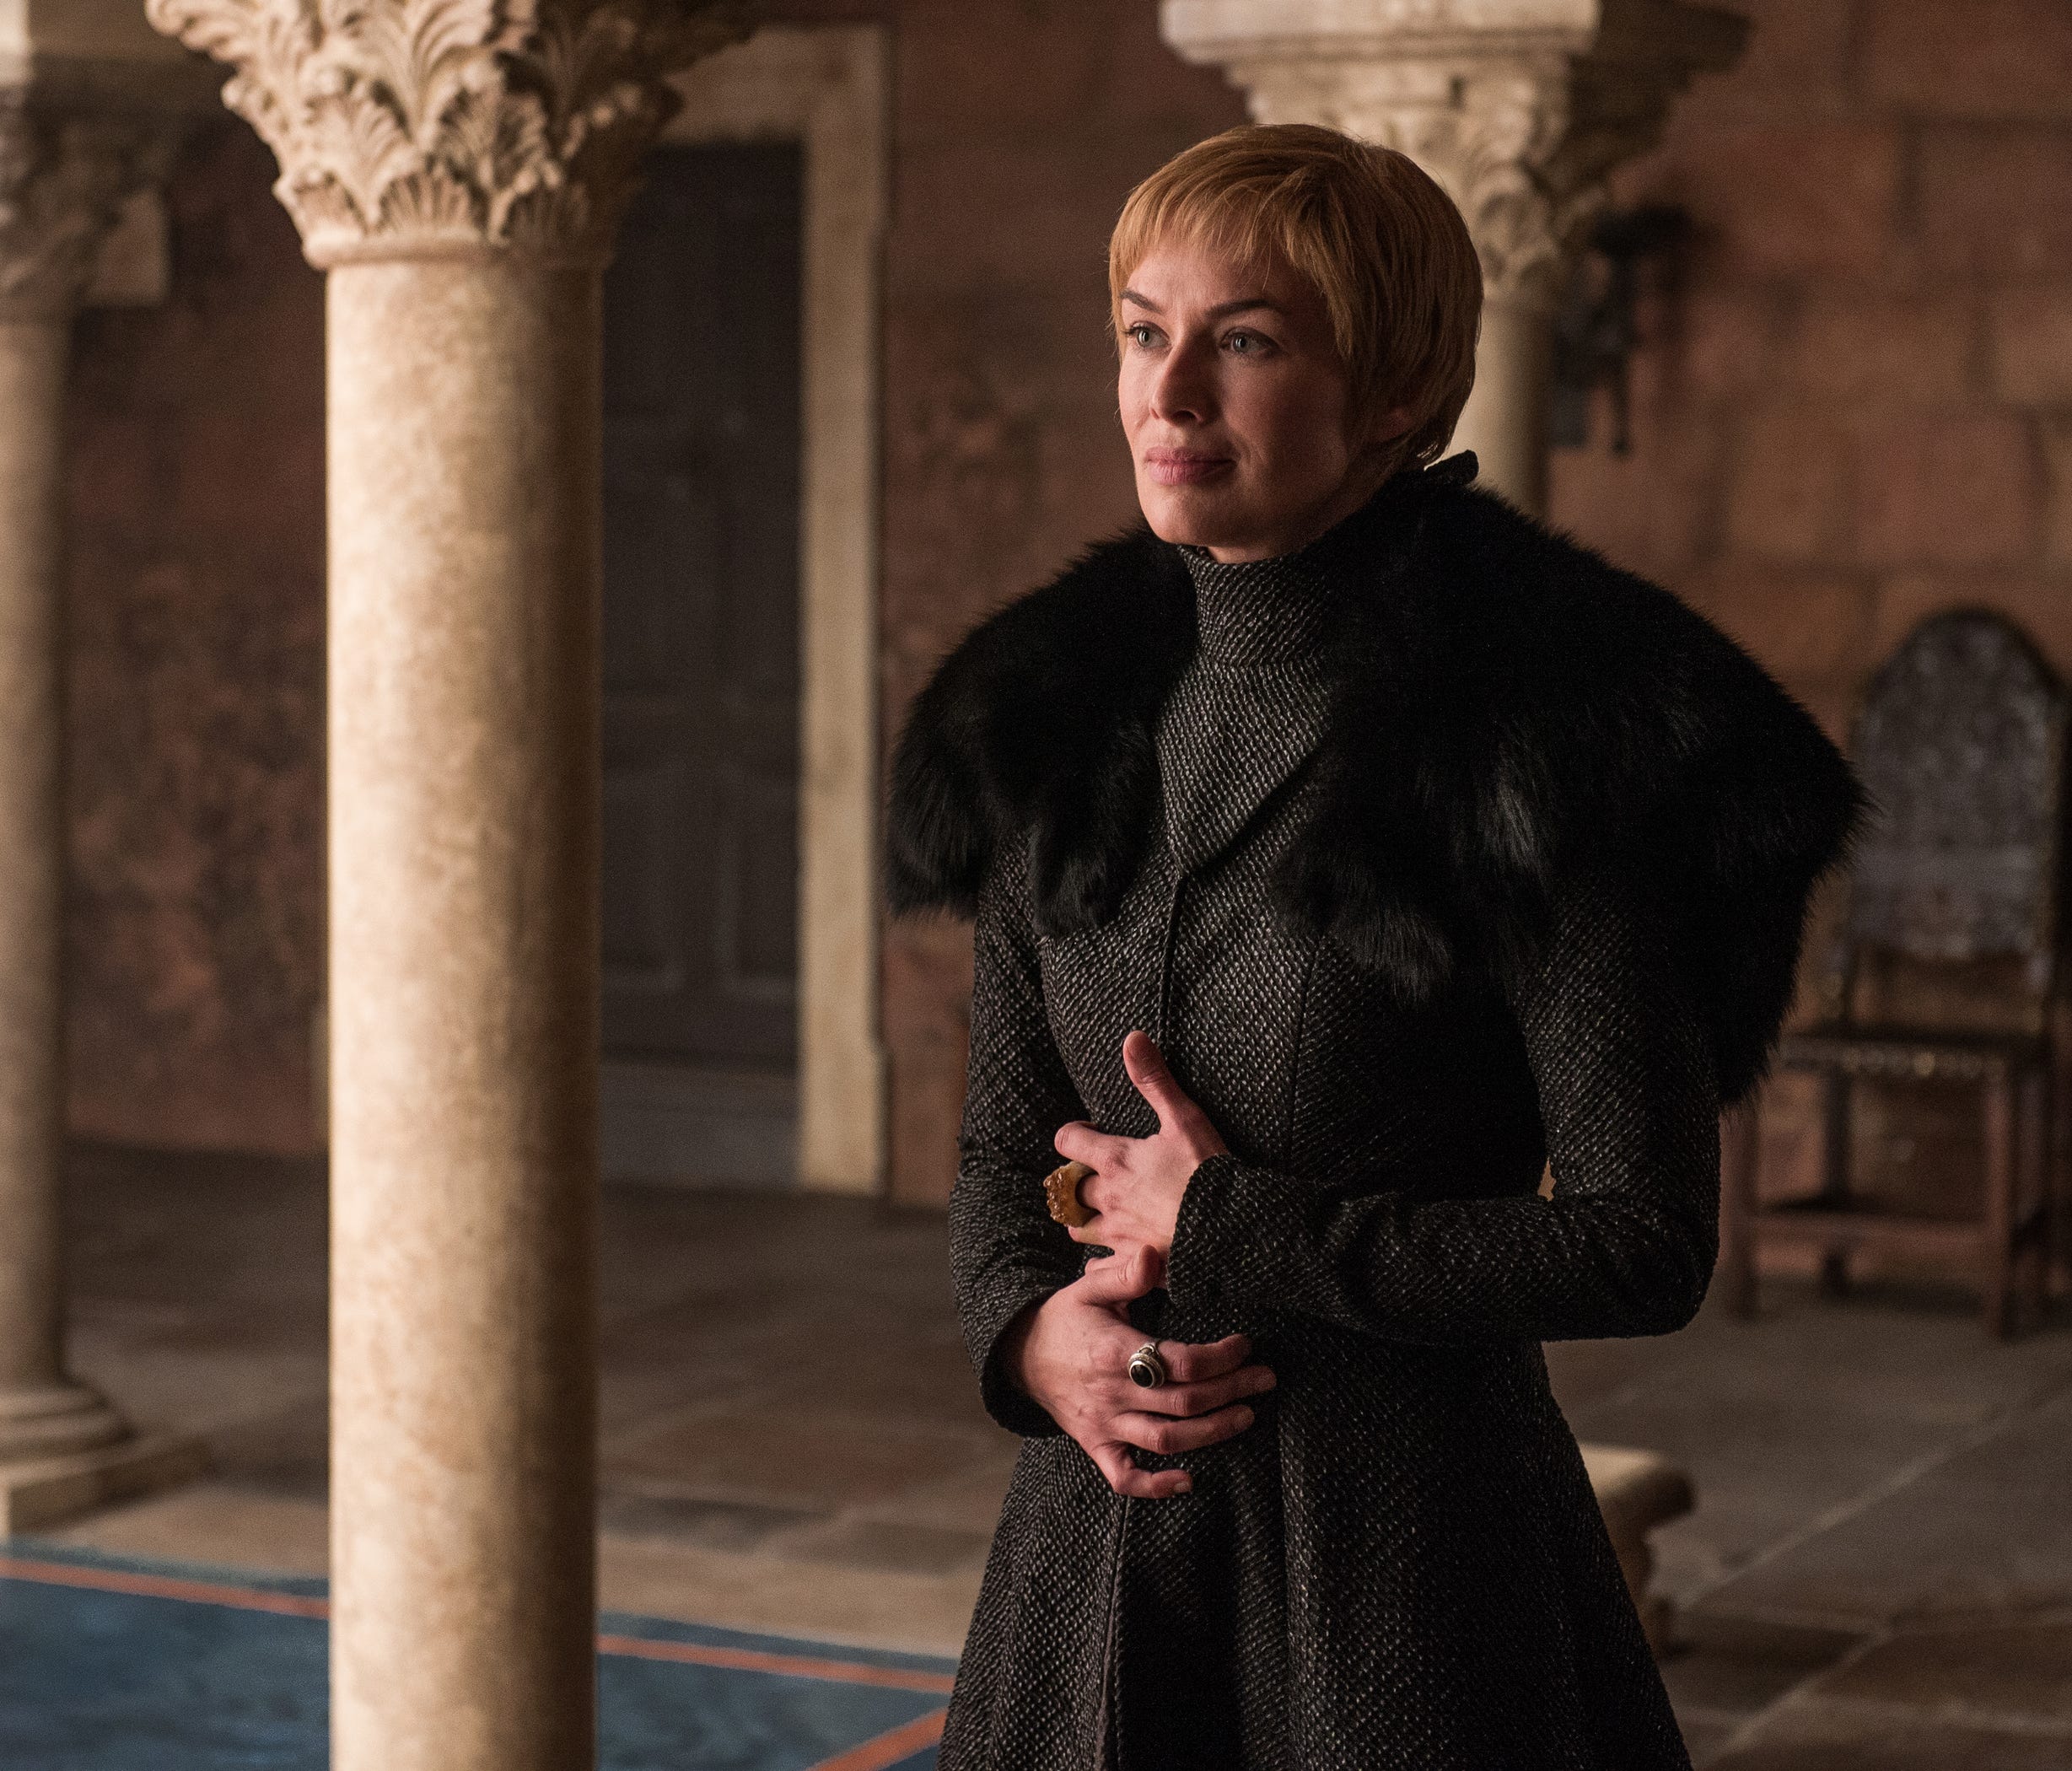 Lena Headey as Cersei Lannister in the Season 7 finale of 'Game of Thrones.'